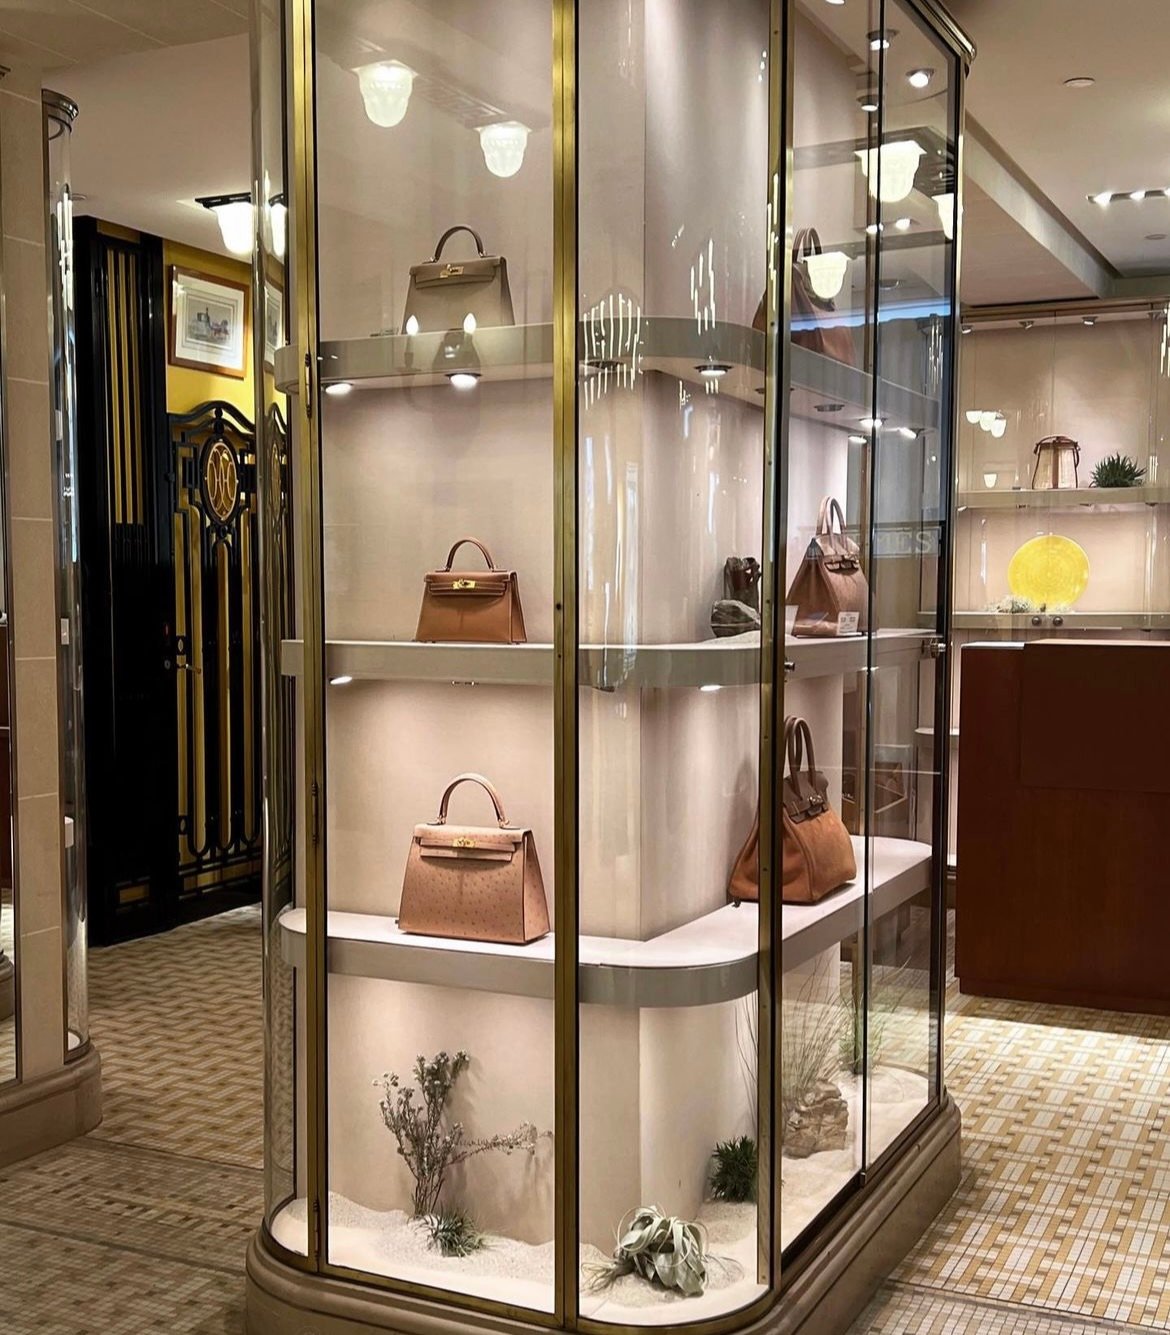 Are You Losing Your Quota Bag to a New Hermès Store? - PurseBop